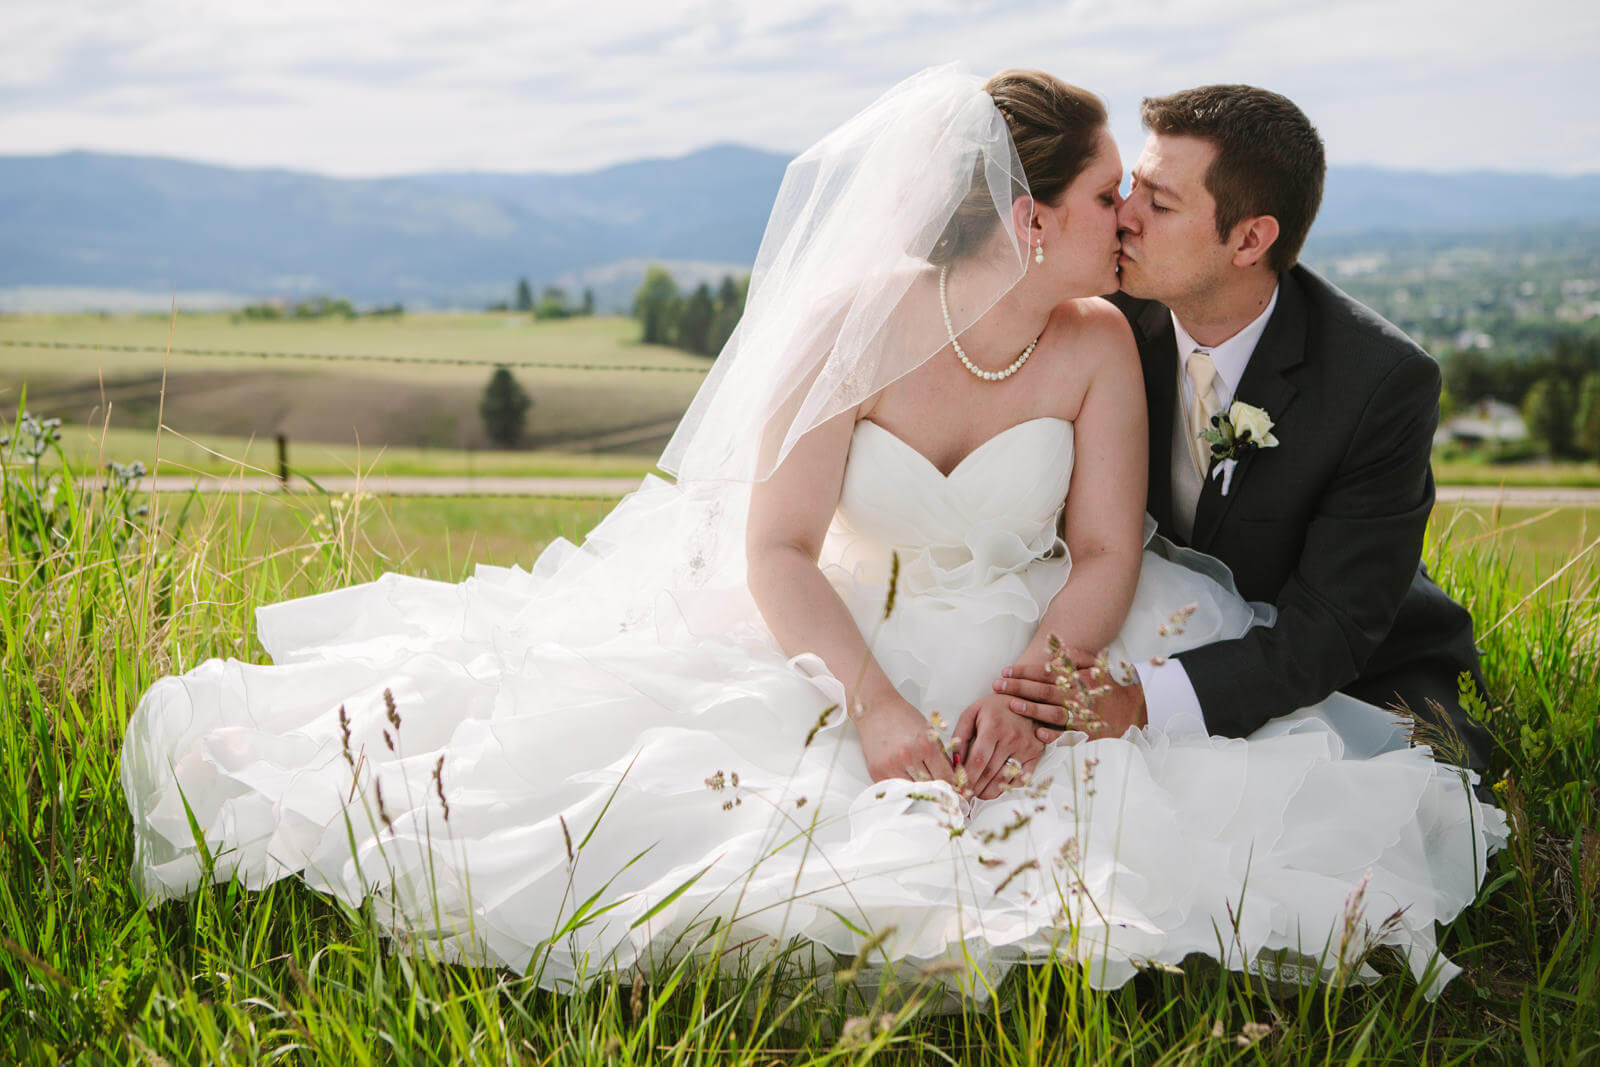 A bride and groom sit in grass and kiss during their wedding in Missoula Montana.